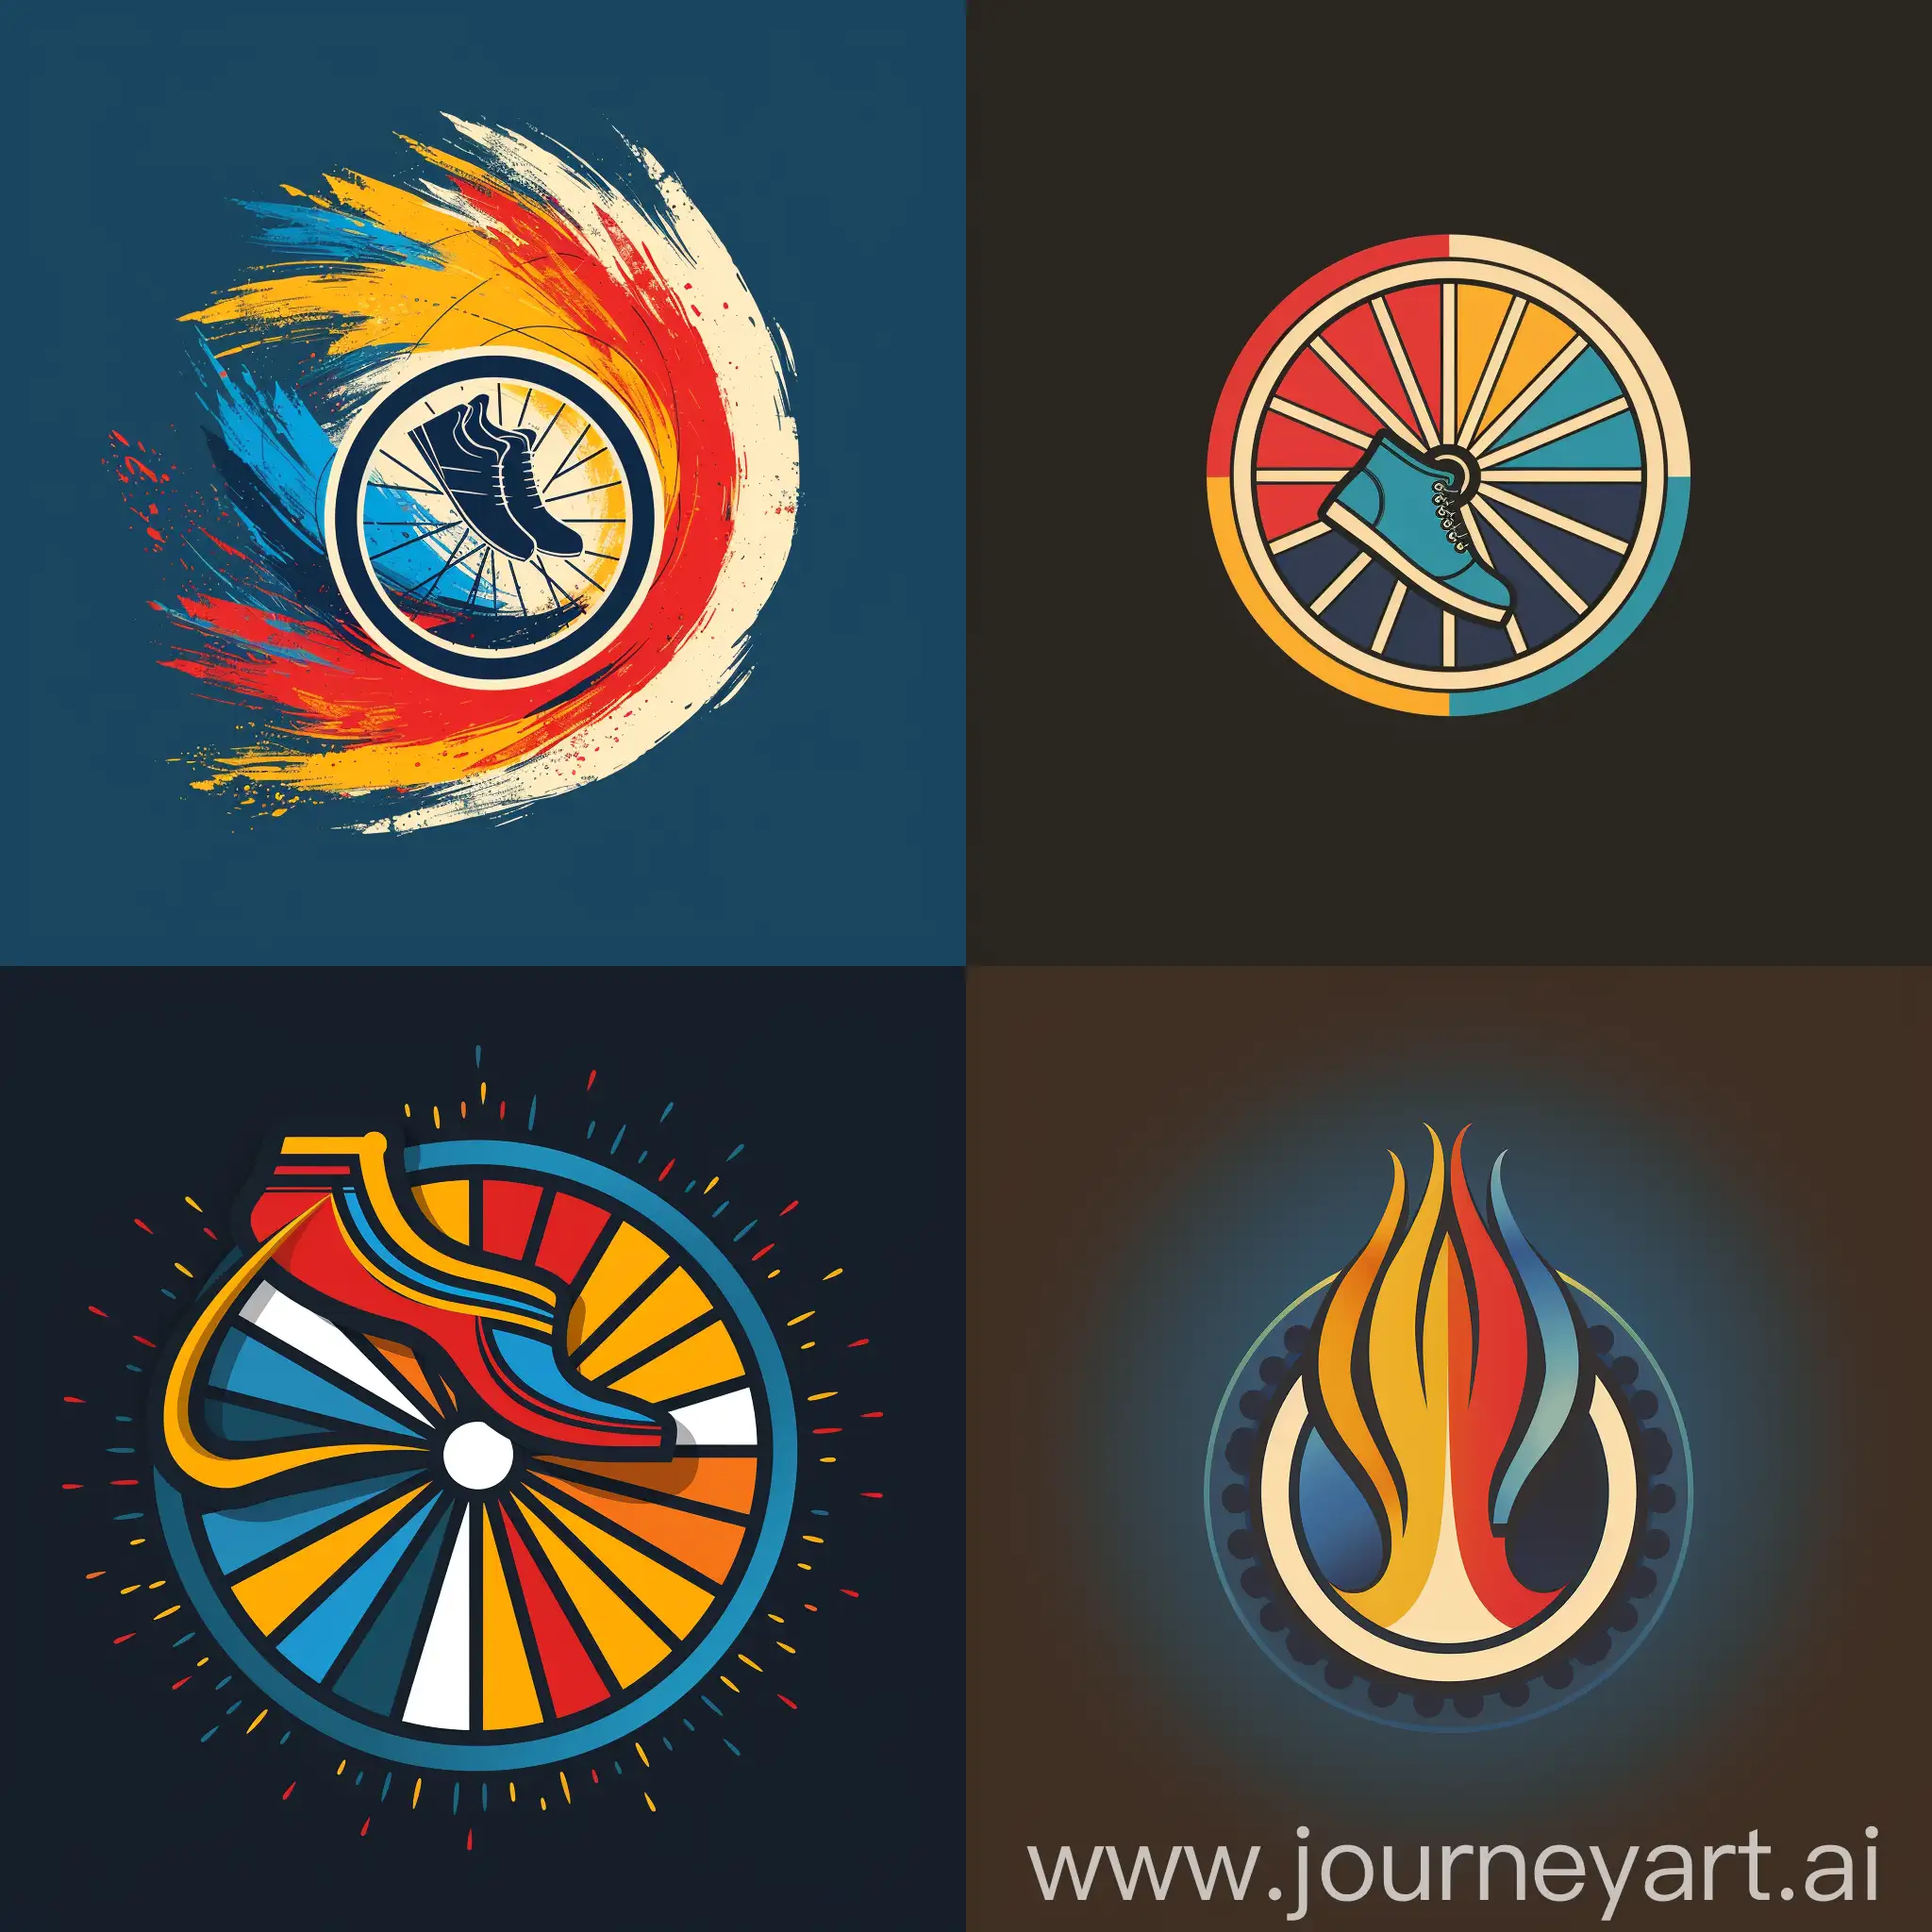 A logo design with Cyclist's Wheel and Shoe Symbol: A stylized wheel with a shoe inside represents the fusion between biking and footwear. Use bold colors like red, blue, and yellow to create an eye-catching logo.  [Create a logo for a bike shoe product] . use this image as an example  
[https://image.pollinations.ai/prompt/Cyclist's Wheel and Shoe Symbol: A stylized wheel with a shoe inside represents the fusion between biking and footwear. Use bold colors like red, blue, and yellow to create an eye-catching logo Create a logo for a bike shoe ?nofeed=true&nologo=true] --ar 1:1 --stylize 750 --v 6